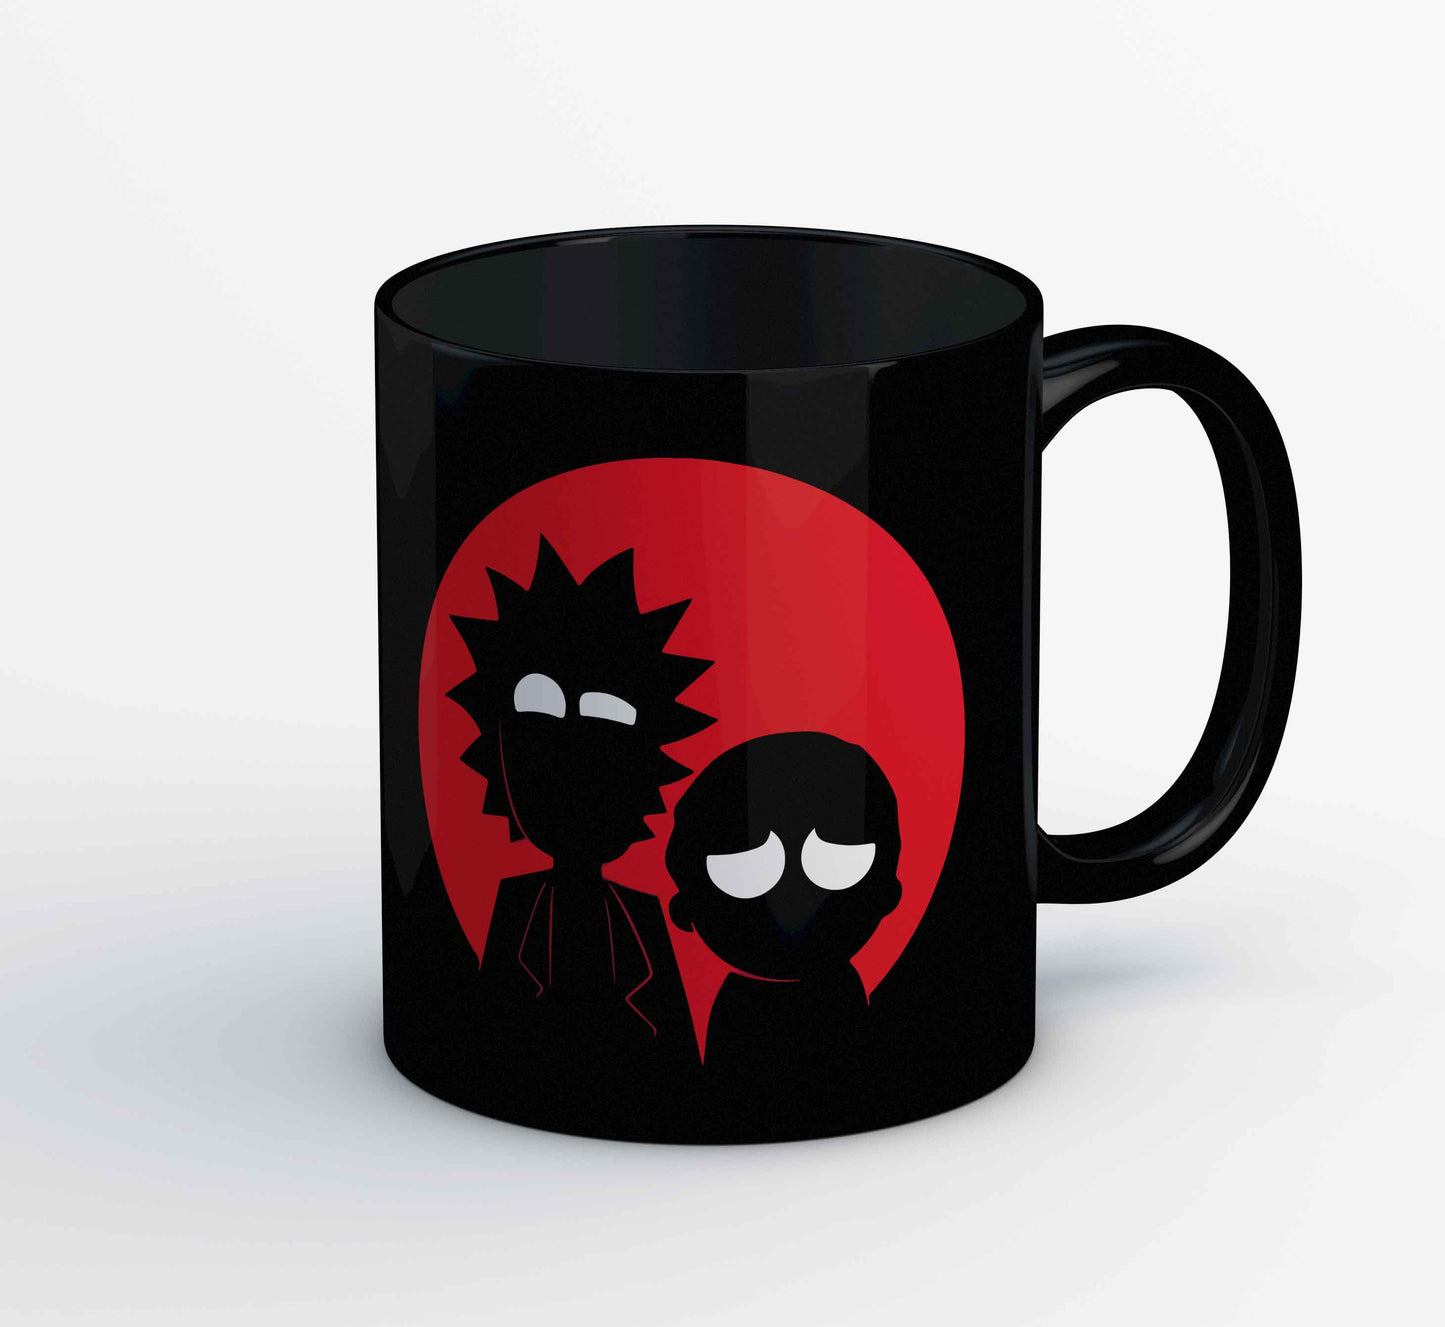 rick and morty silhouette mug coffee ceramic buy online india the banyan tee tbt men women girls boys unisex  rick and morty online summer beth mr meeseeks jerry quote vector art clothing accessories merchandise